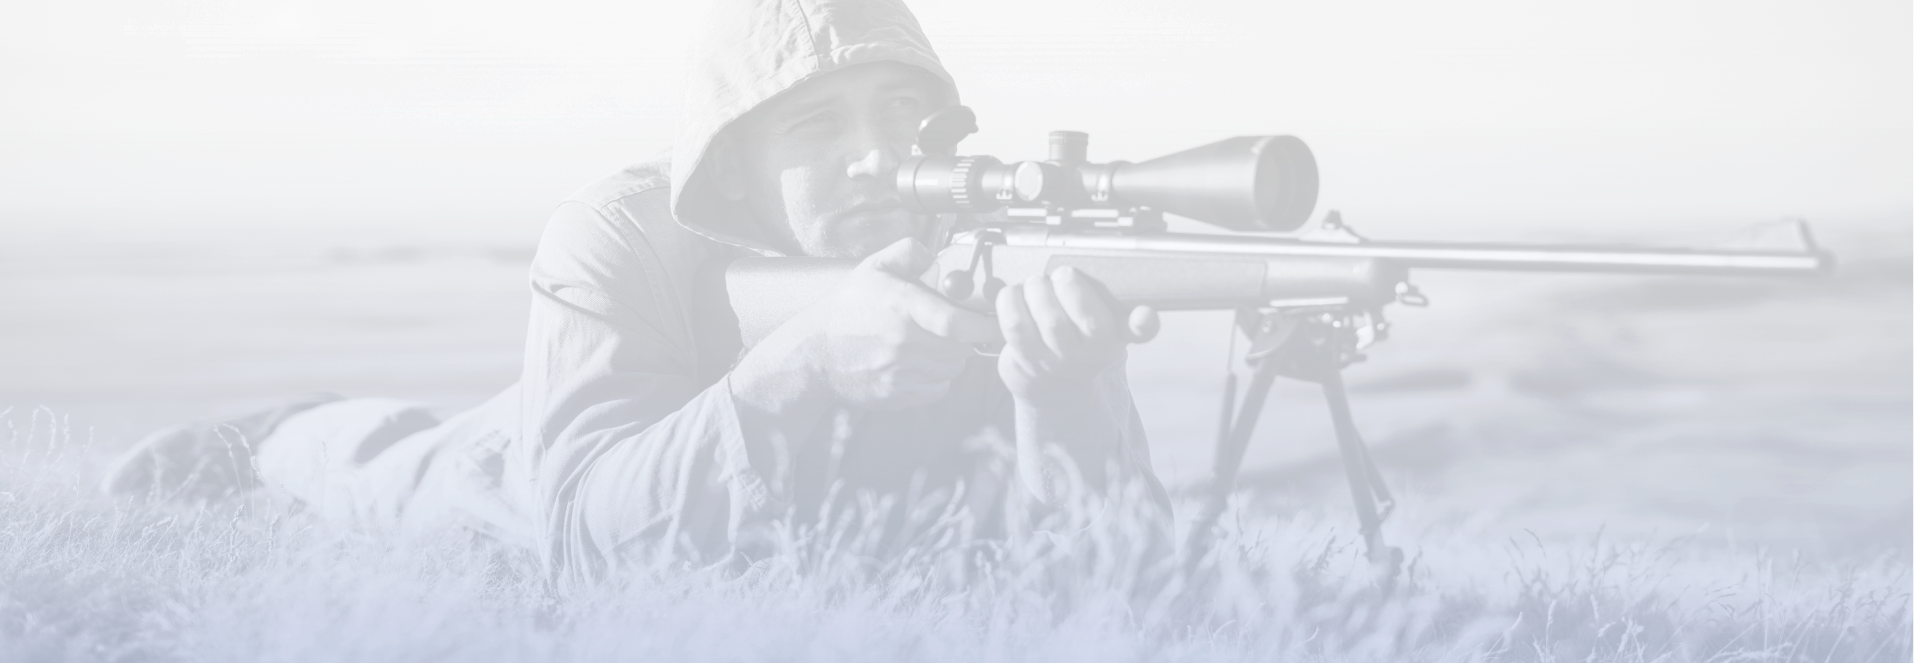 Background image of man prone in a field aiming down a rifle's sight